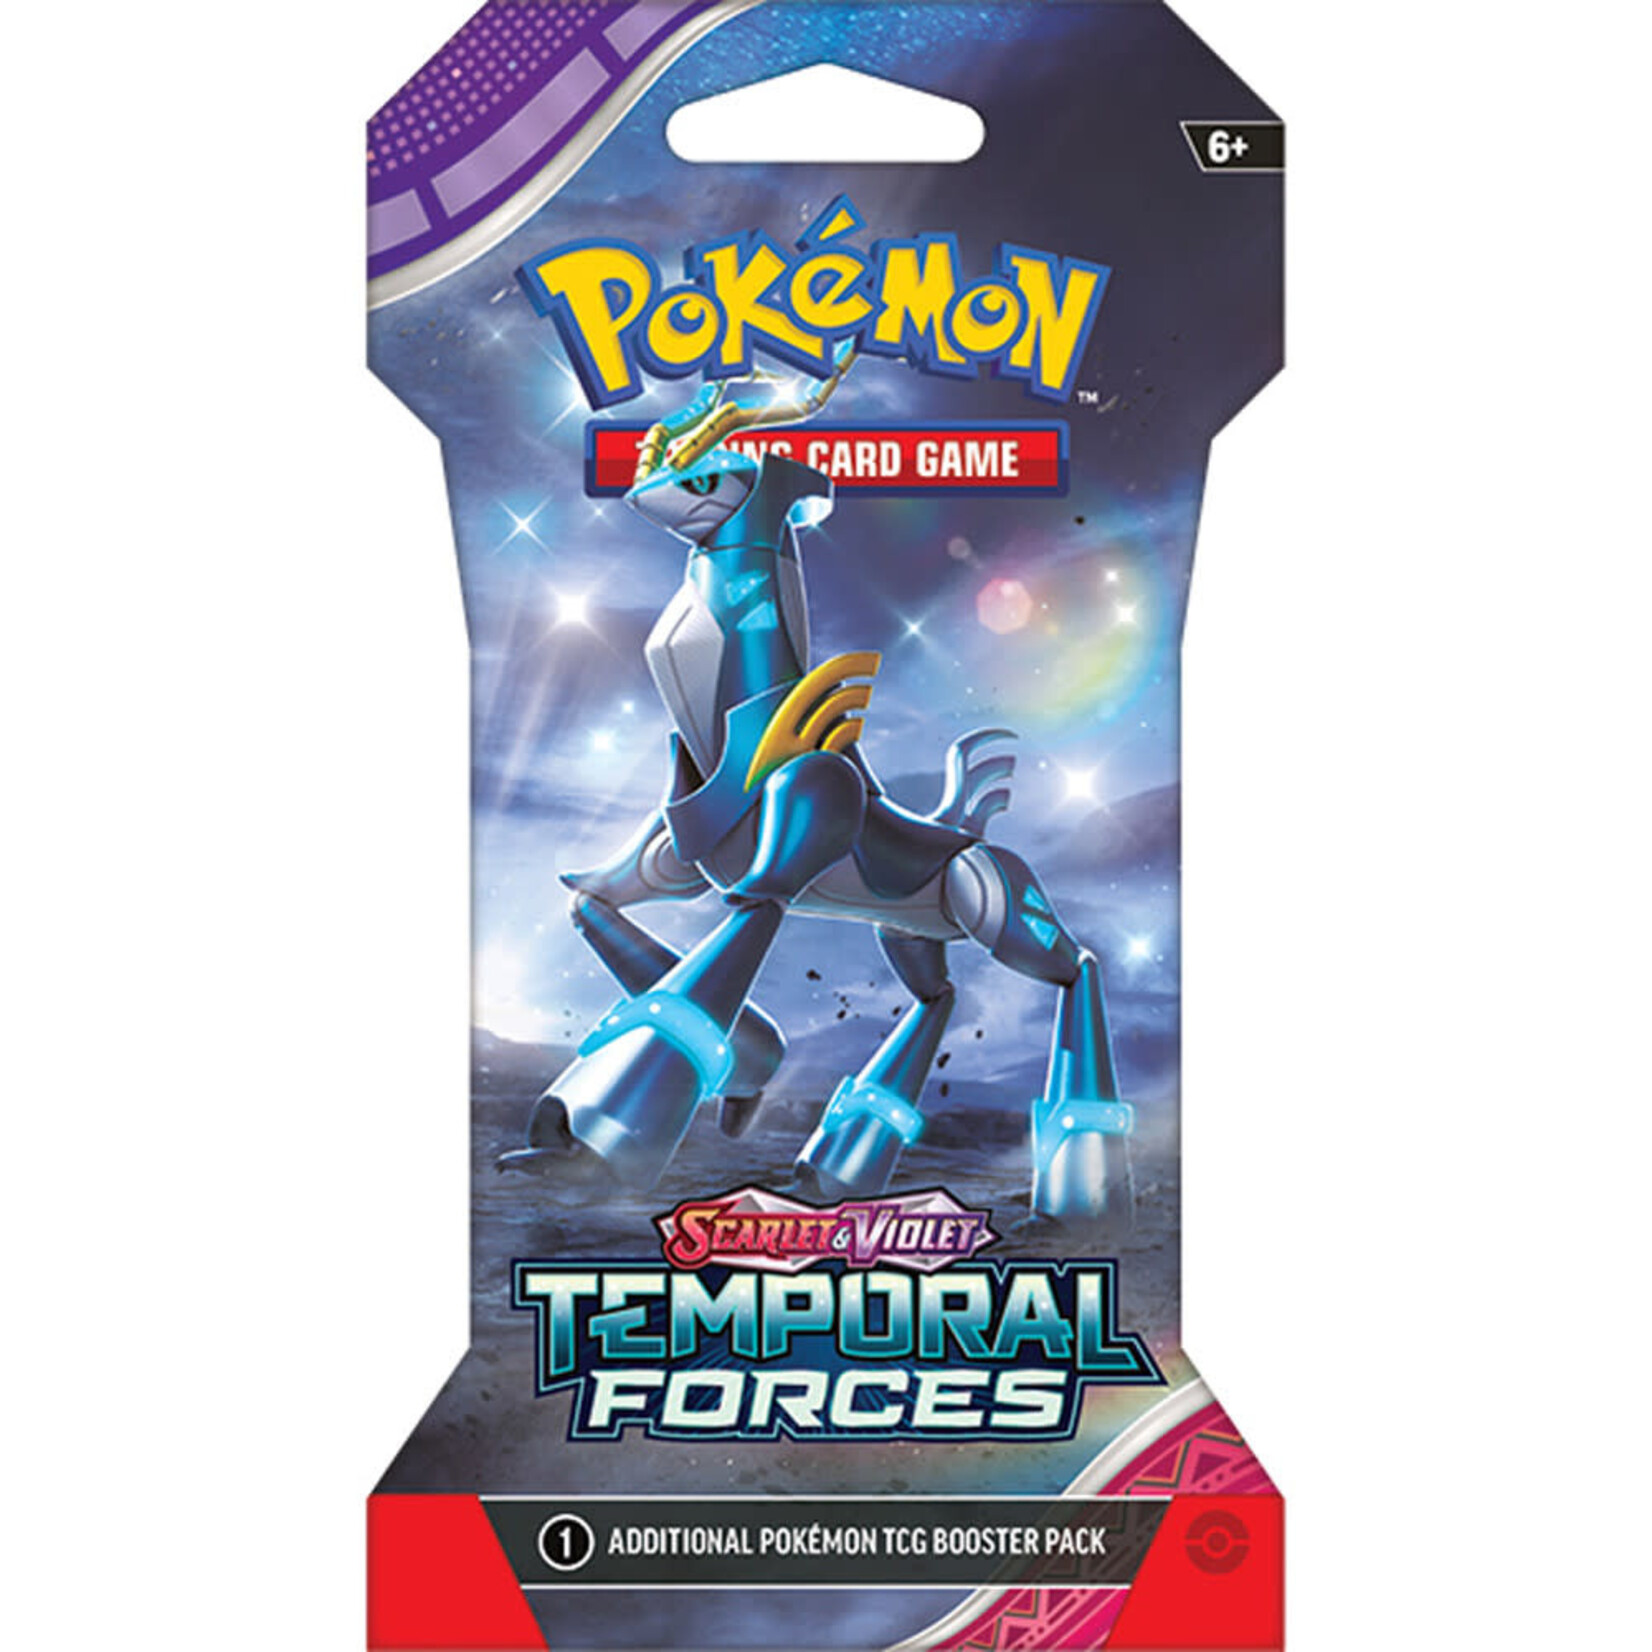 Pokemon Company International Pokemon Scarlet and Violet Temporal Forces Sleeved Booster PACK